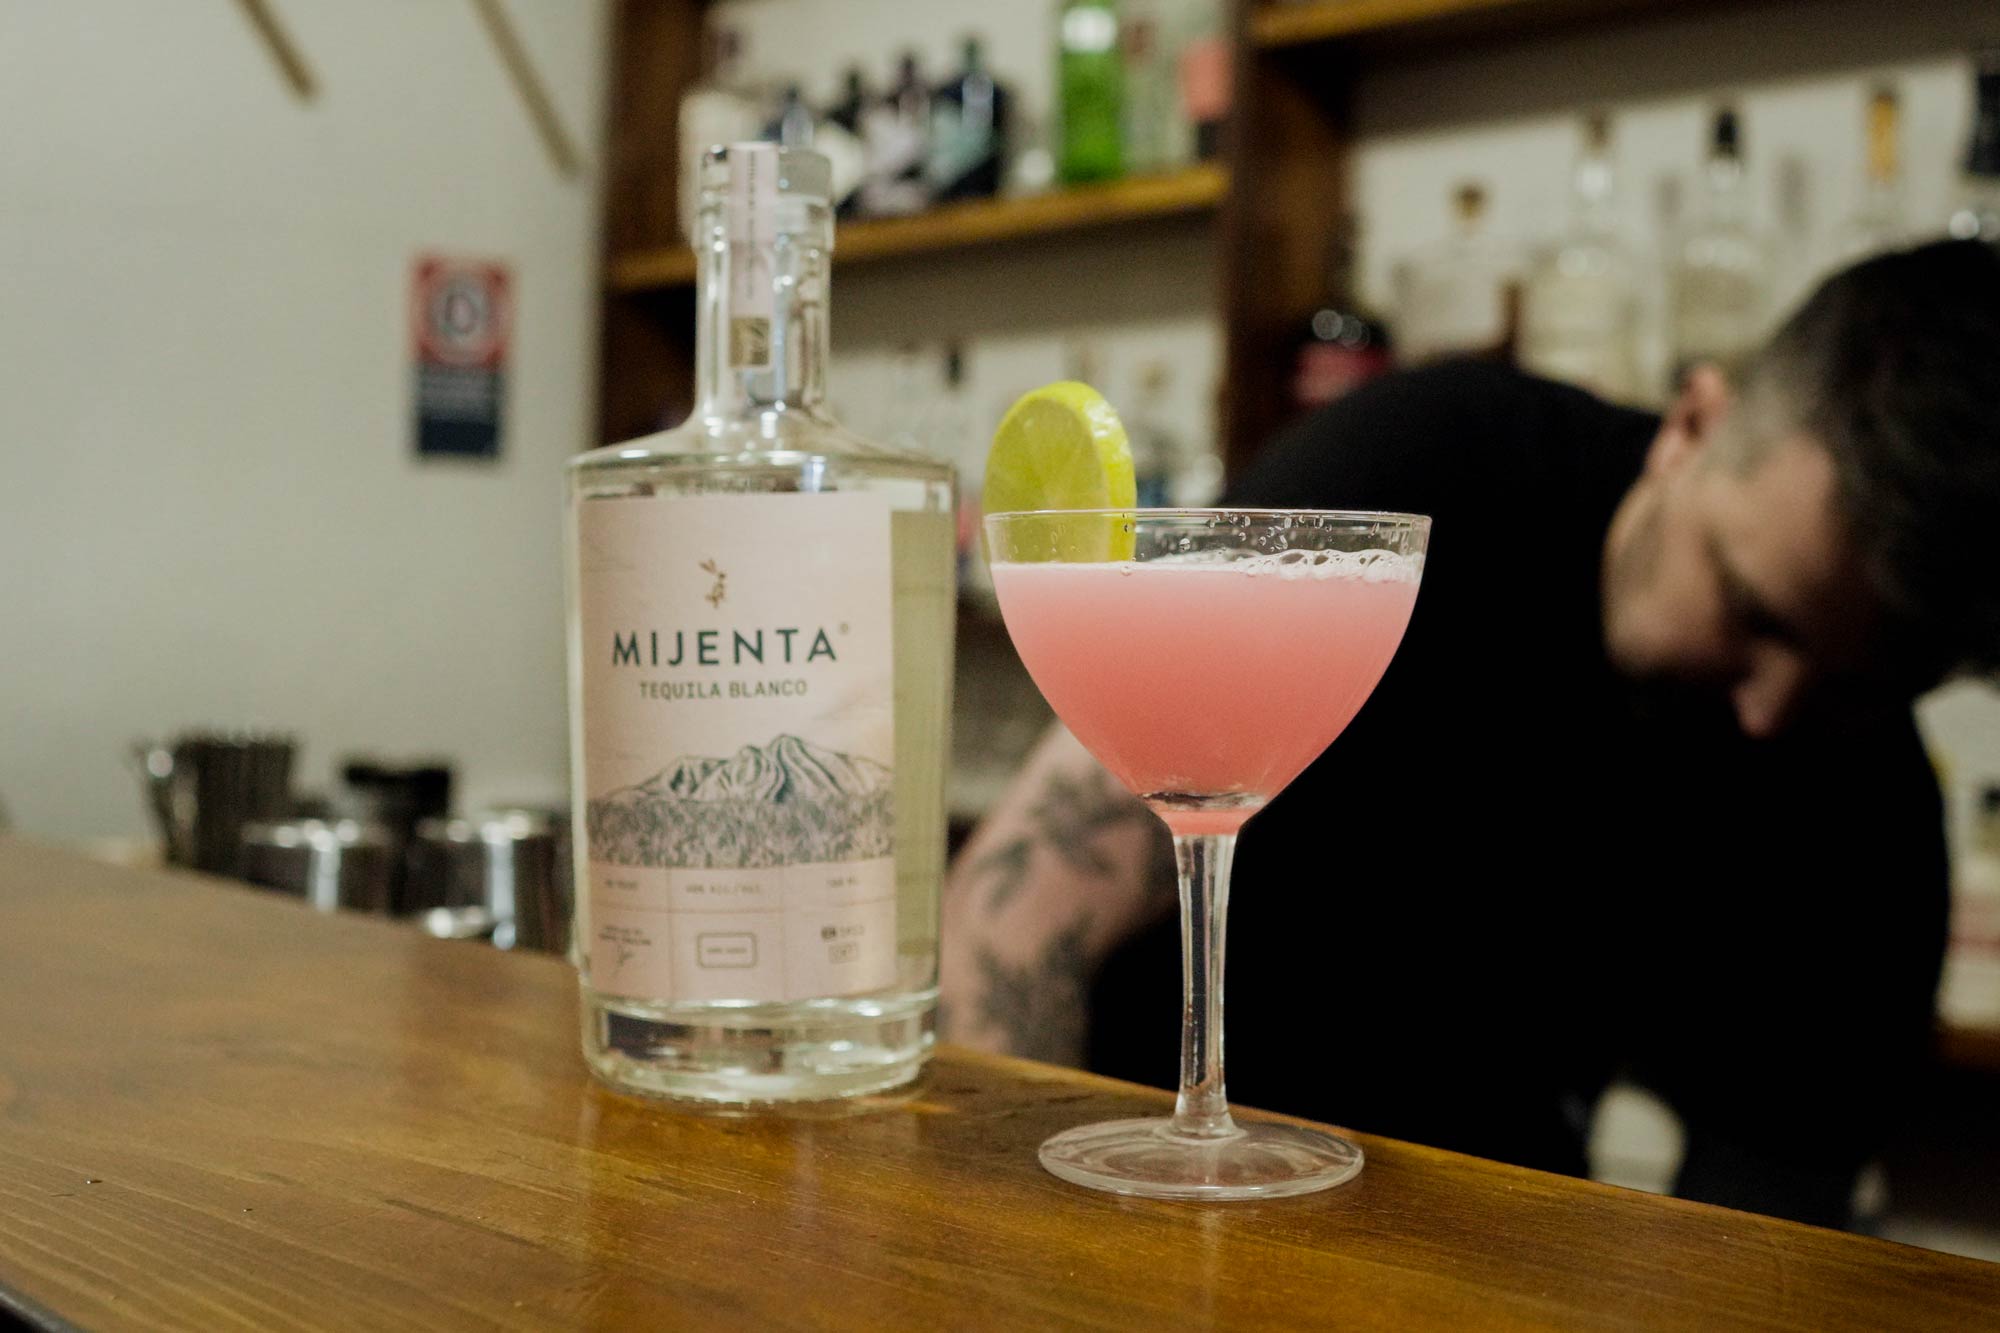 The Siesta cocktail is a tequilafied Hemingway Daiquiri we love